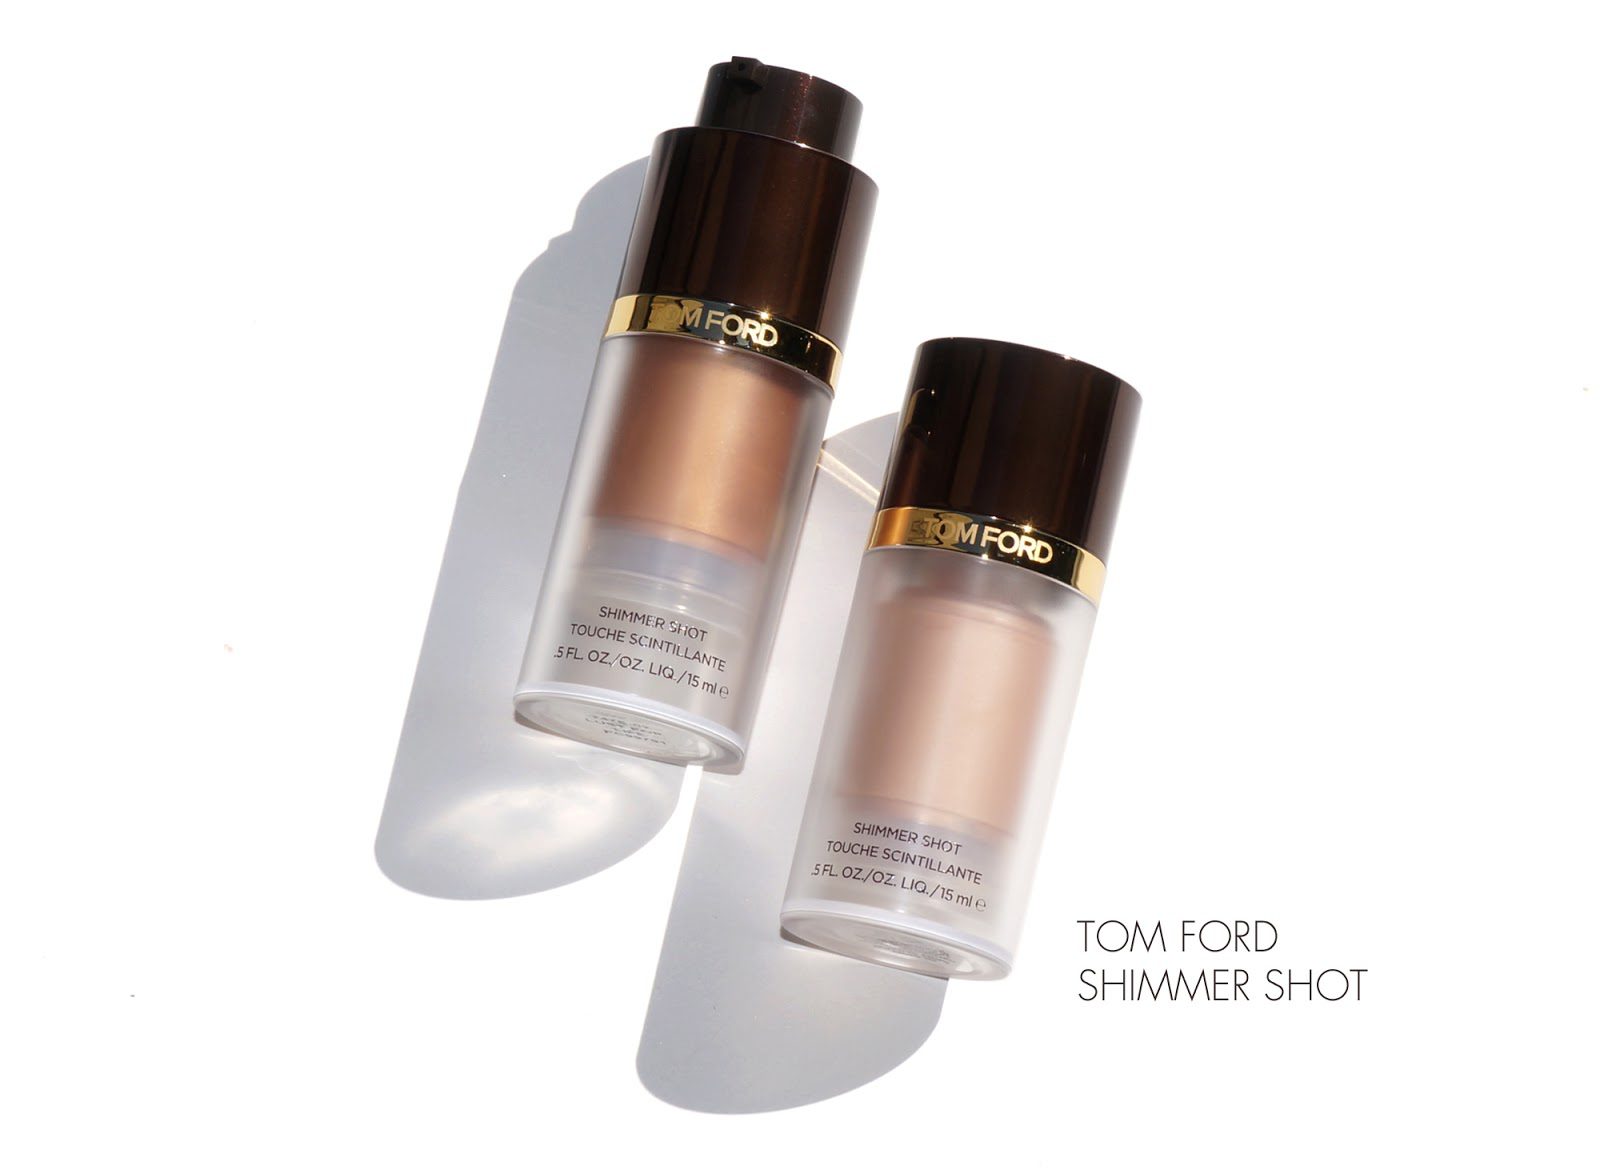 The Beauty Look Book - Tom Ford Shimmer Shots